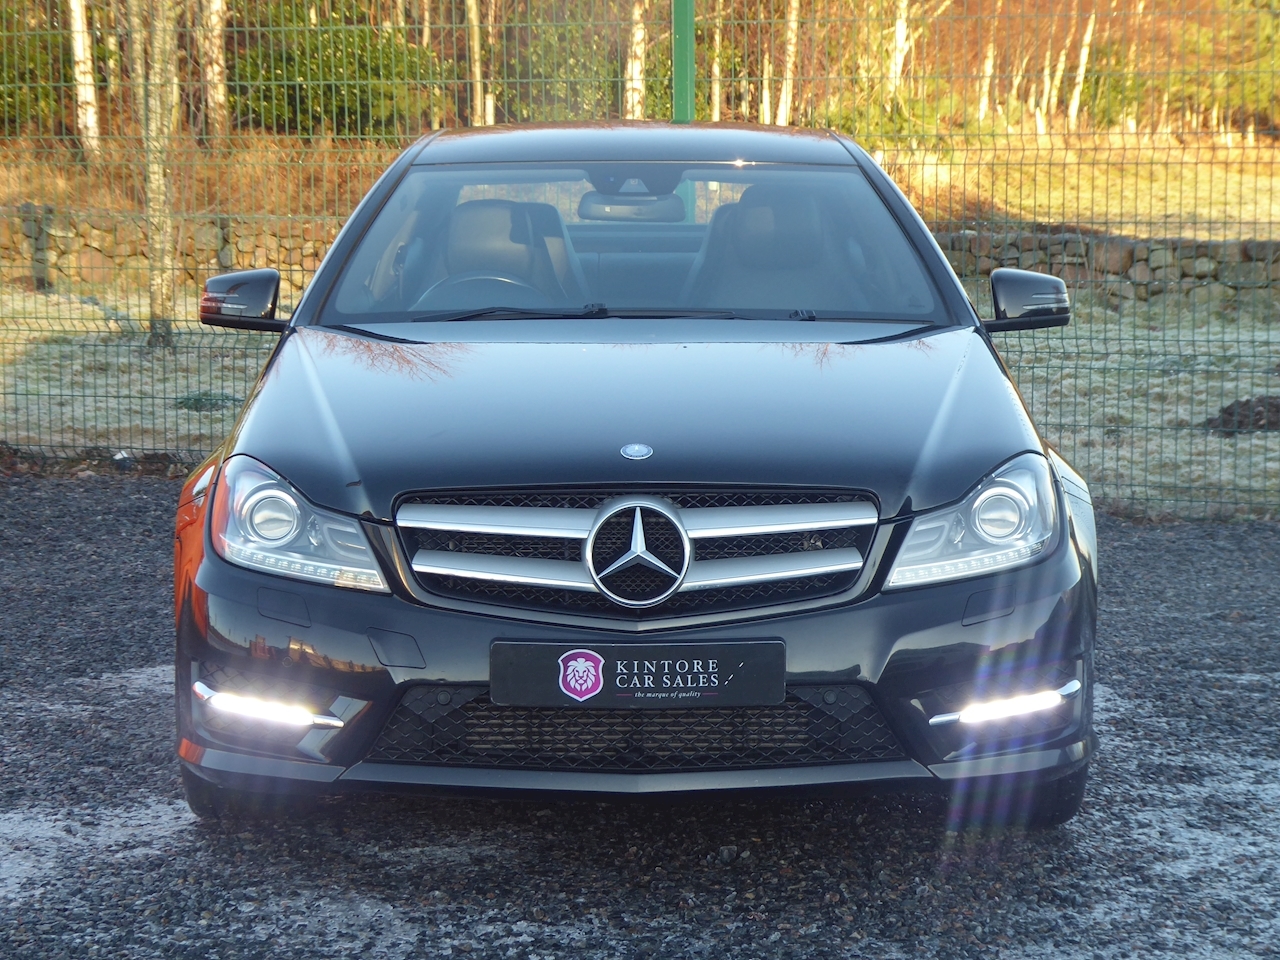 C Class C250 CDI BlueEFFICIENCY AMG Sport 2.2 2dr Coupe Automatic Diesel